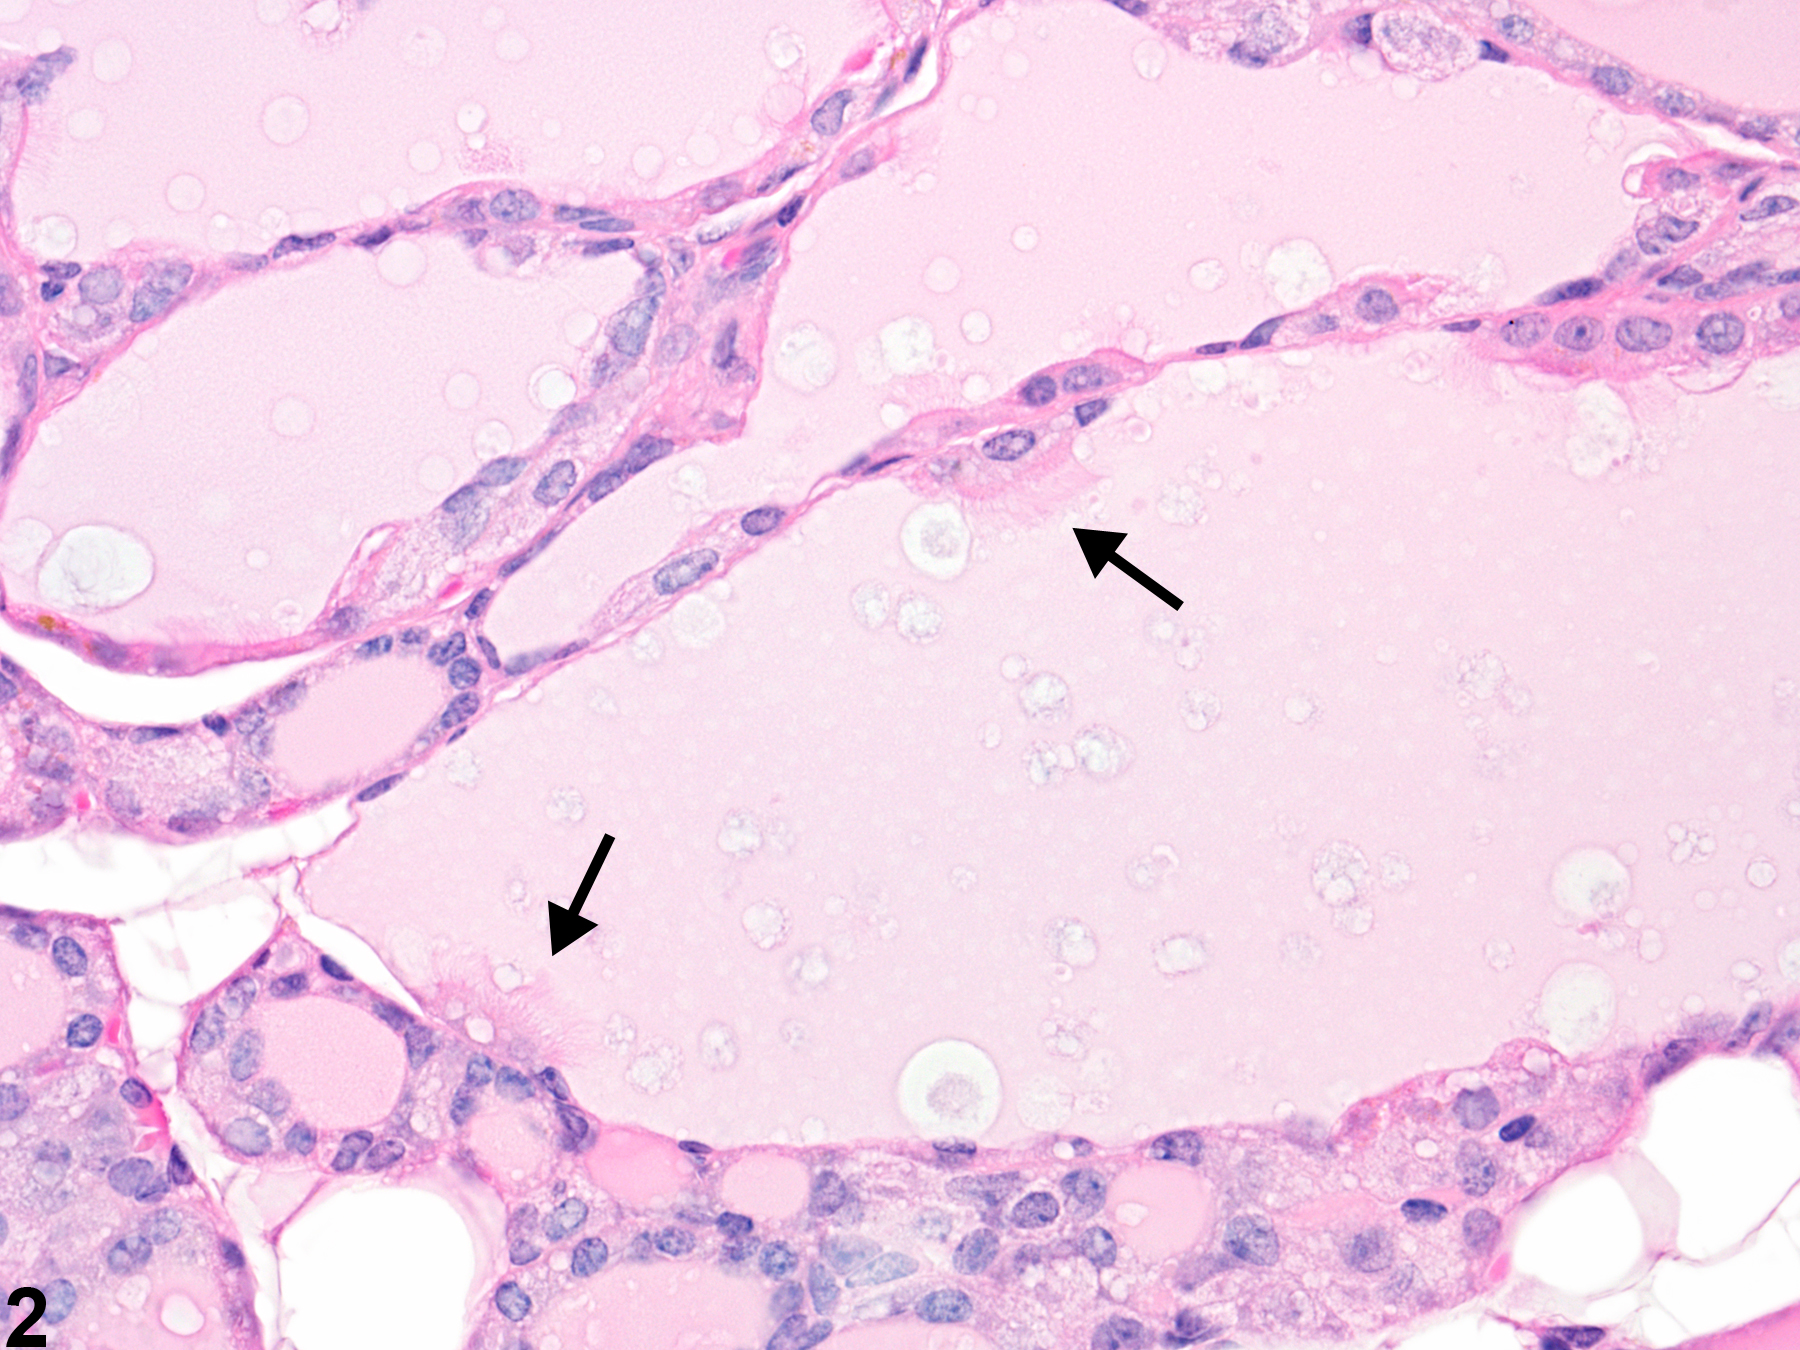 Image of follicle degeneration in the thyroid gland from a female B6C3F1 mouse in a chronic study